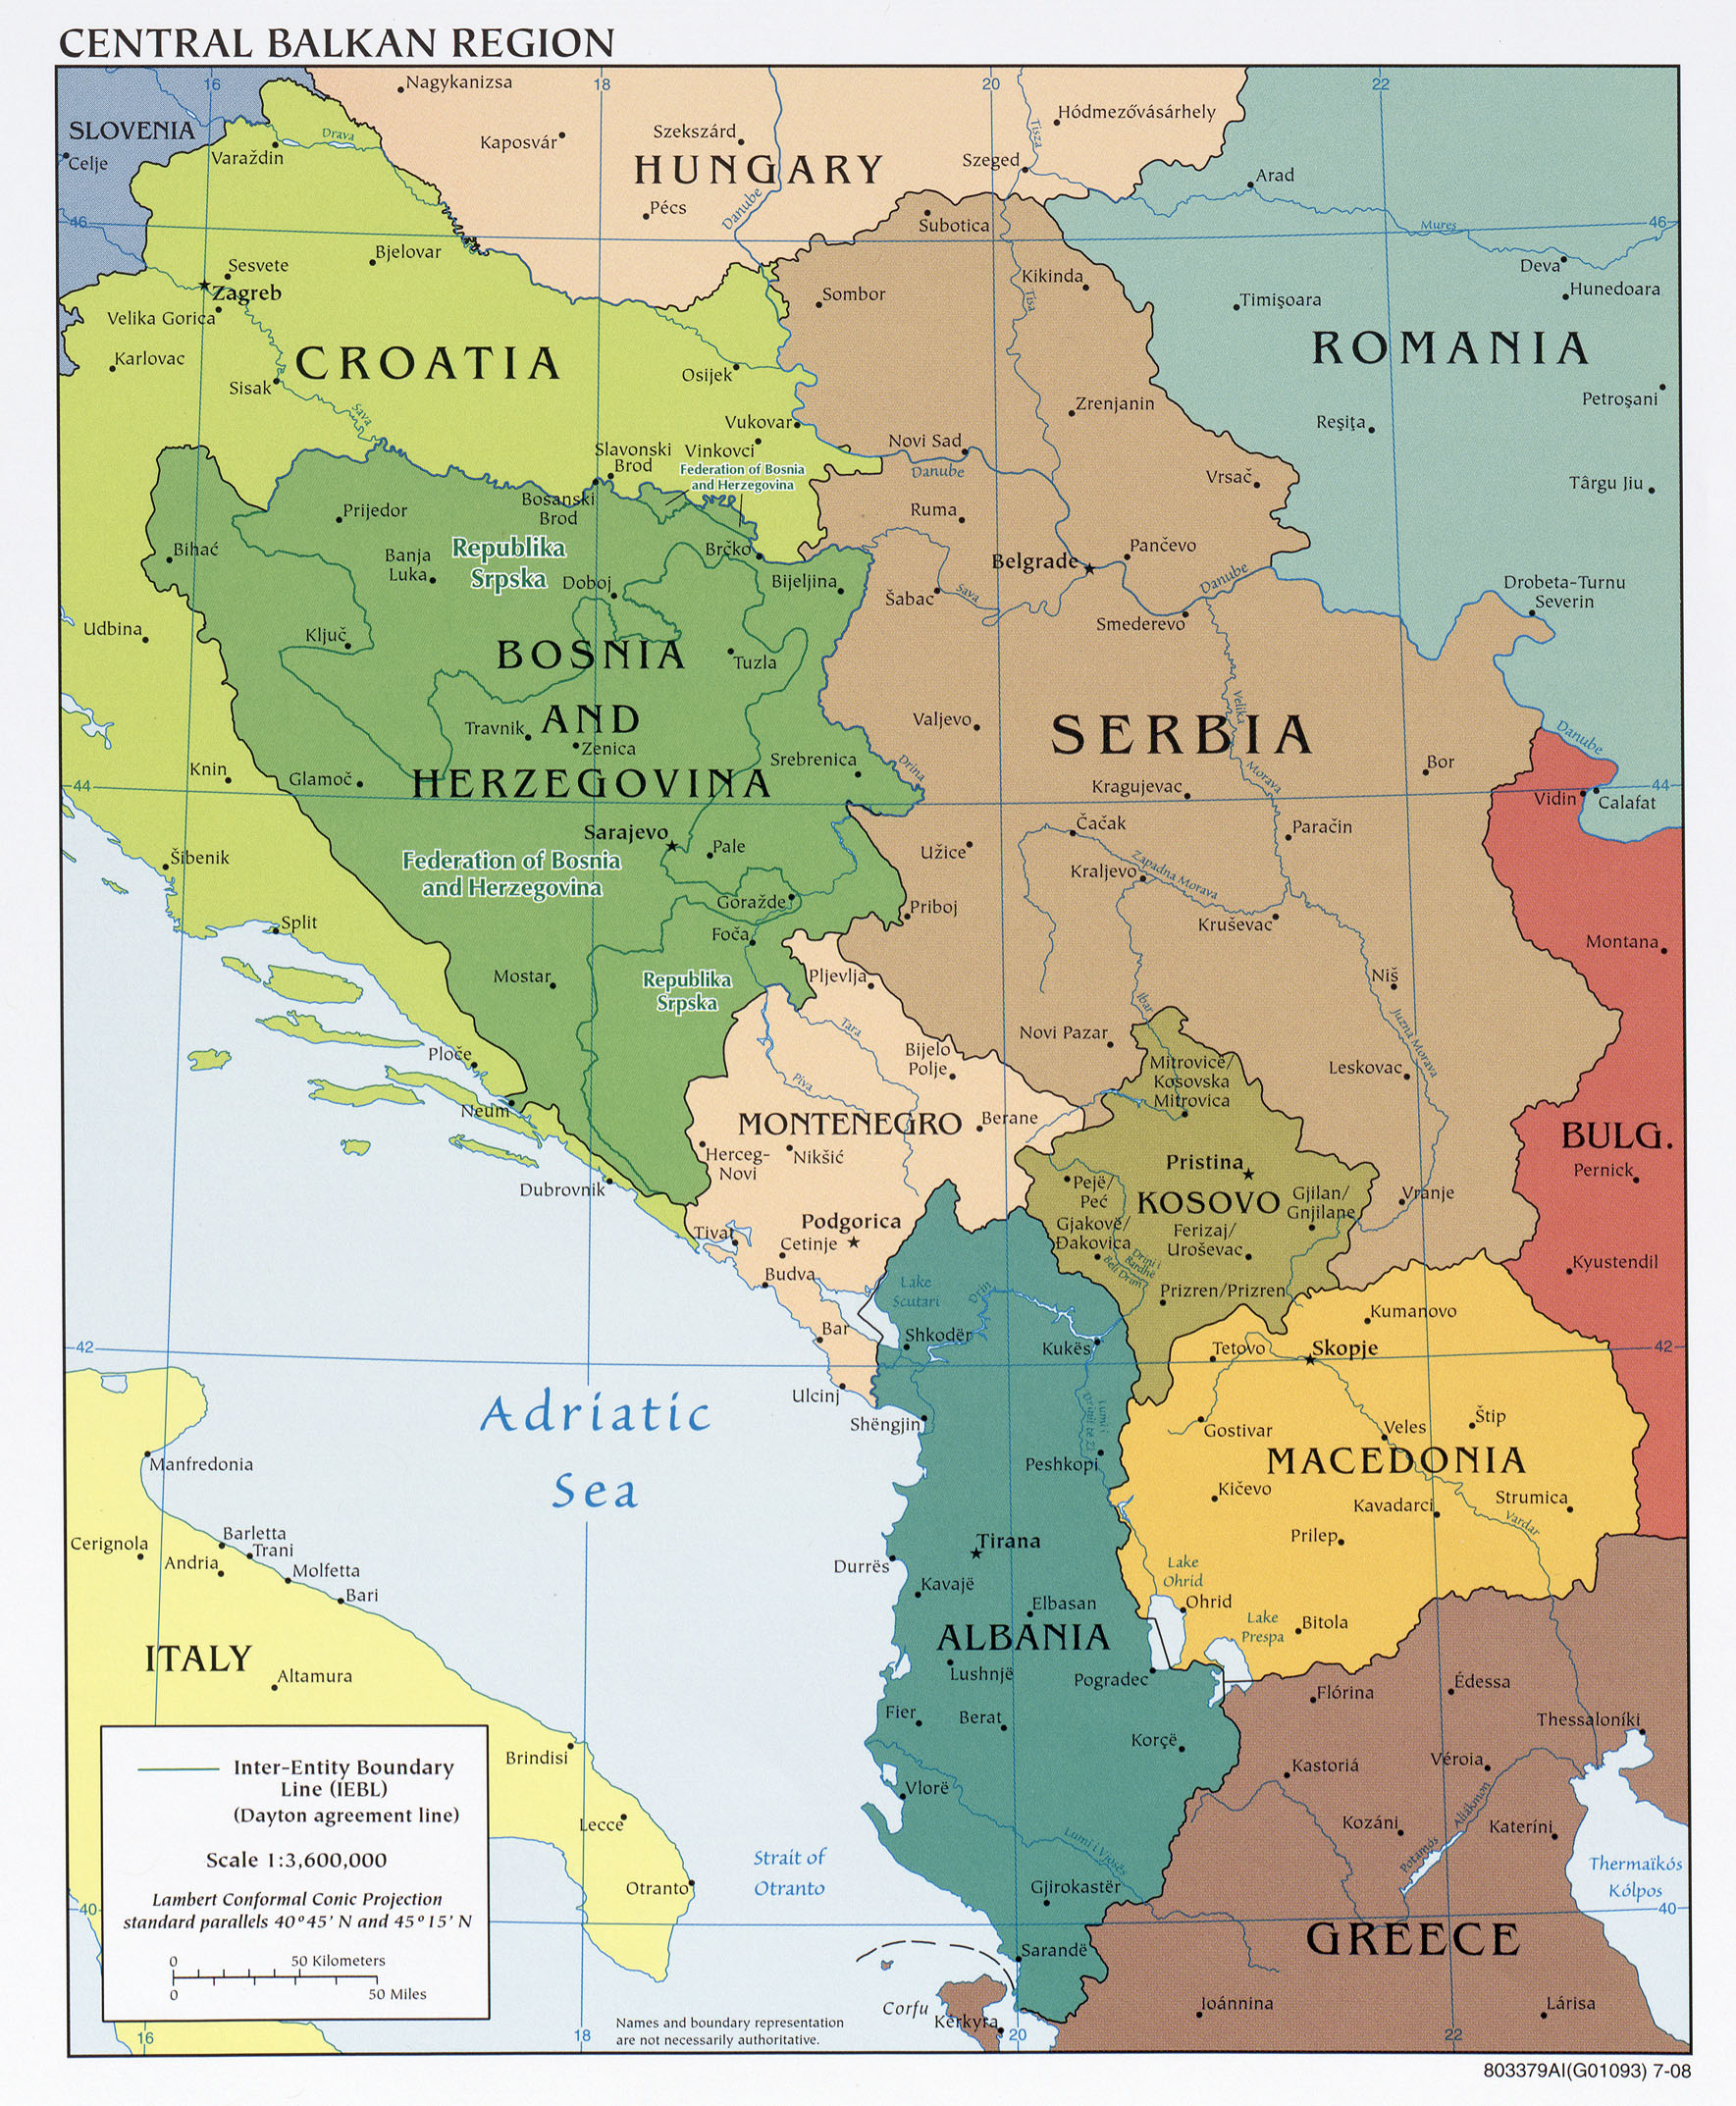 Western-Balkans-Political-Map-2008 - Foreign Policy Research Institute